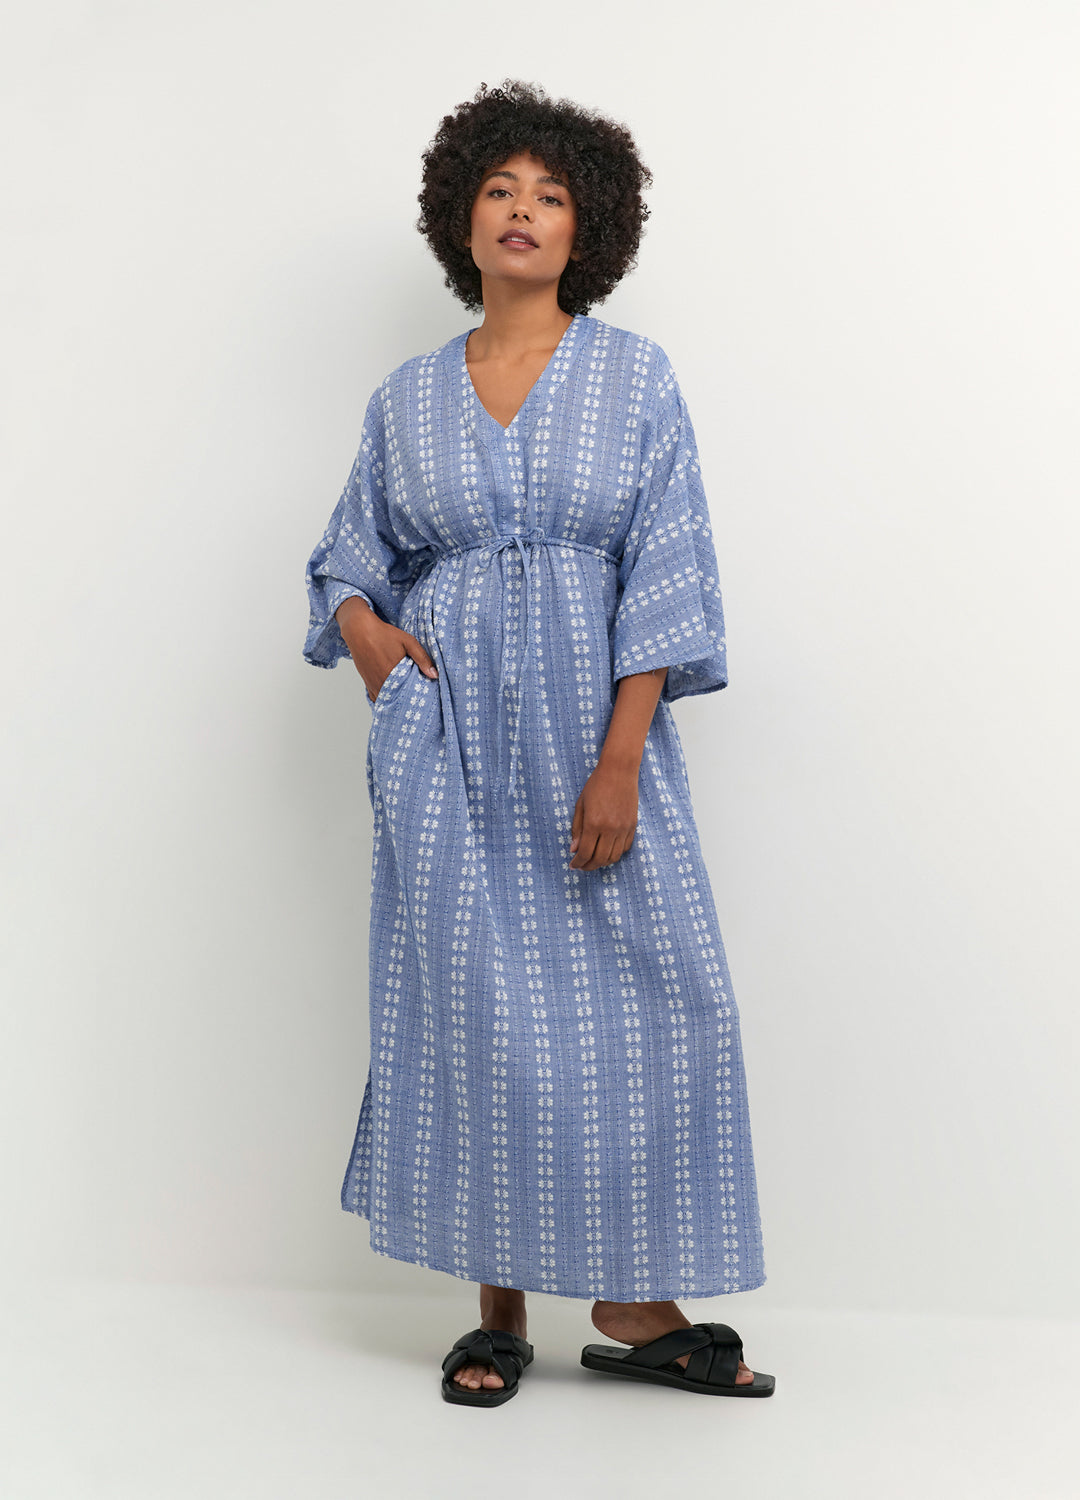 Additional alternate front view of the Culture Adriette Dress in Ultramarine blue pattern with a loose, flowy silhouette at Inner Beach Co, Toronto, Ontario, Canada